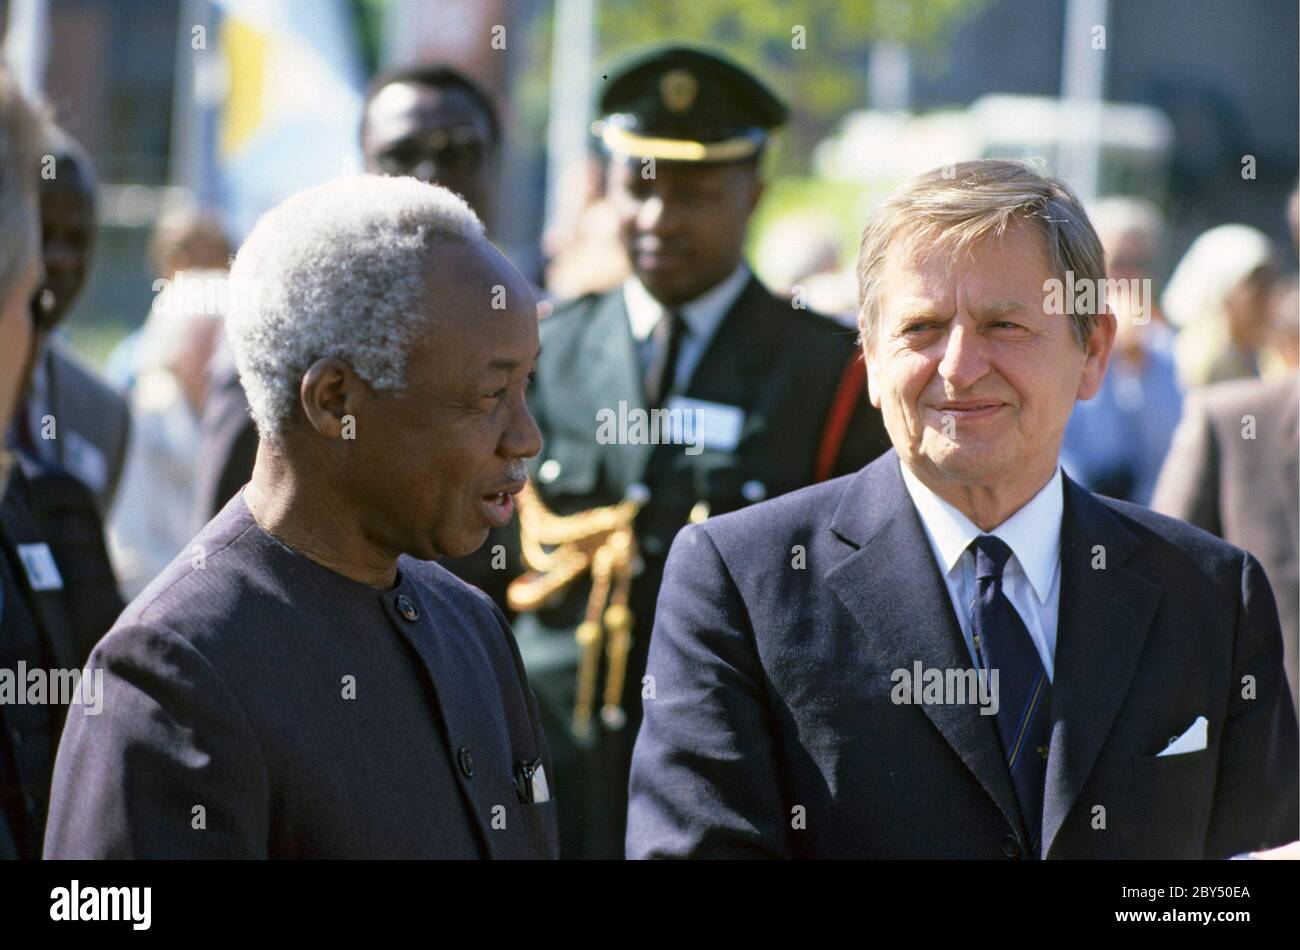 Olof Palme. Swedish social democratic politican and prime minister. Born october 14 1927. Murdered february 28 1985. Pictured here 1985 at a state visit. Stock Photo